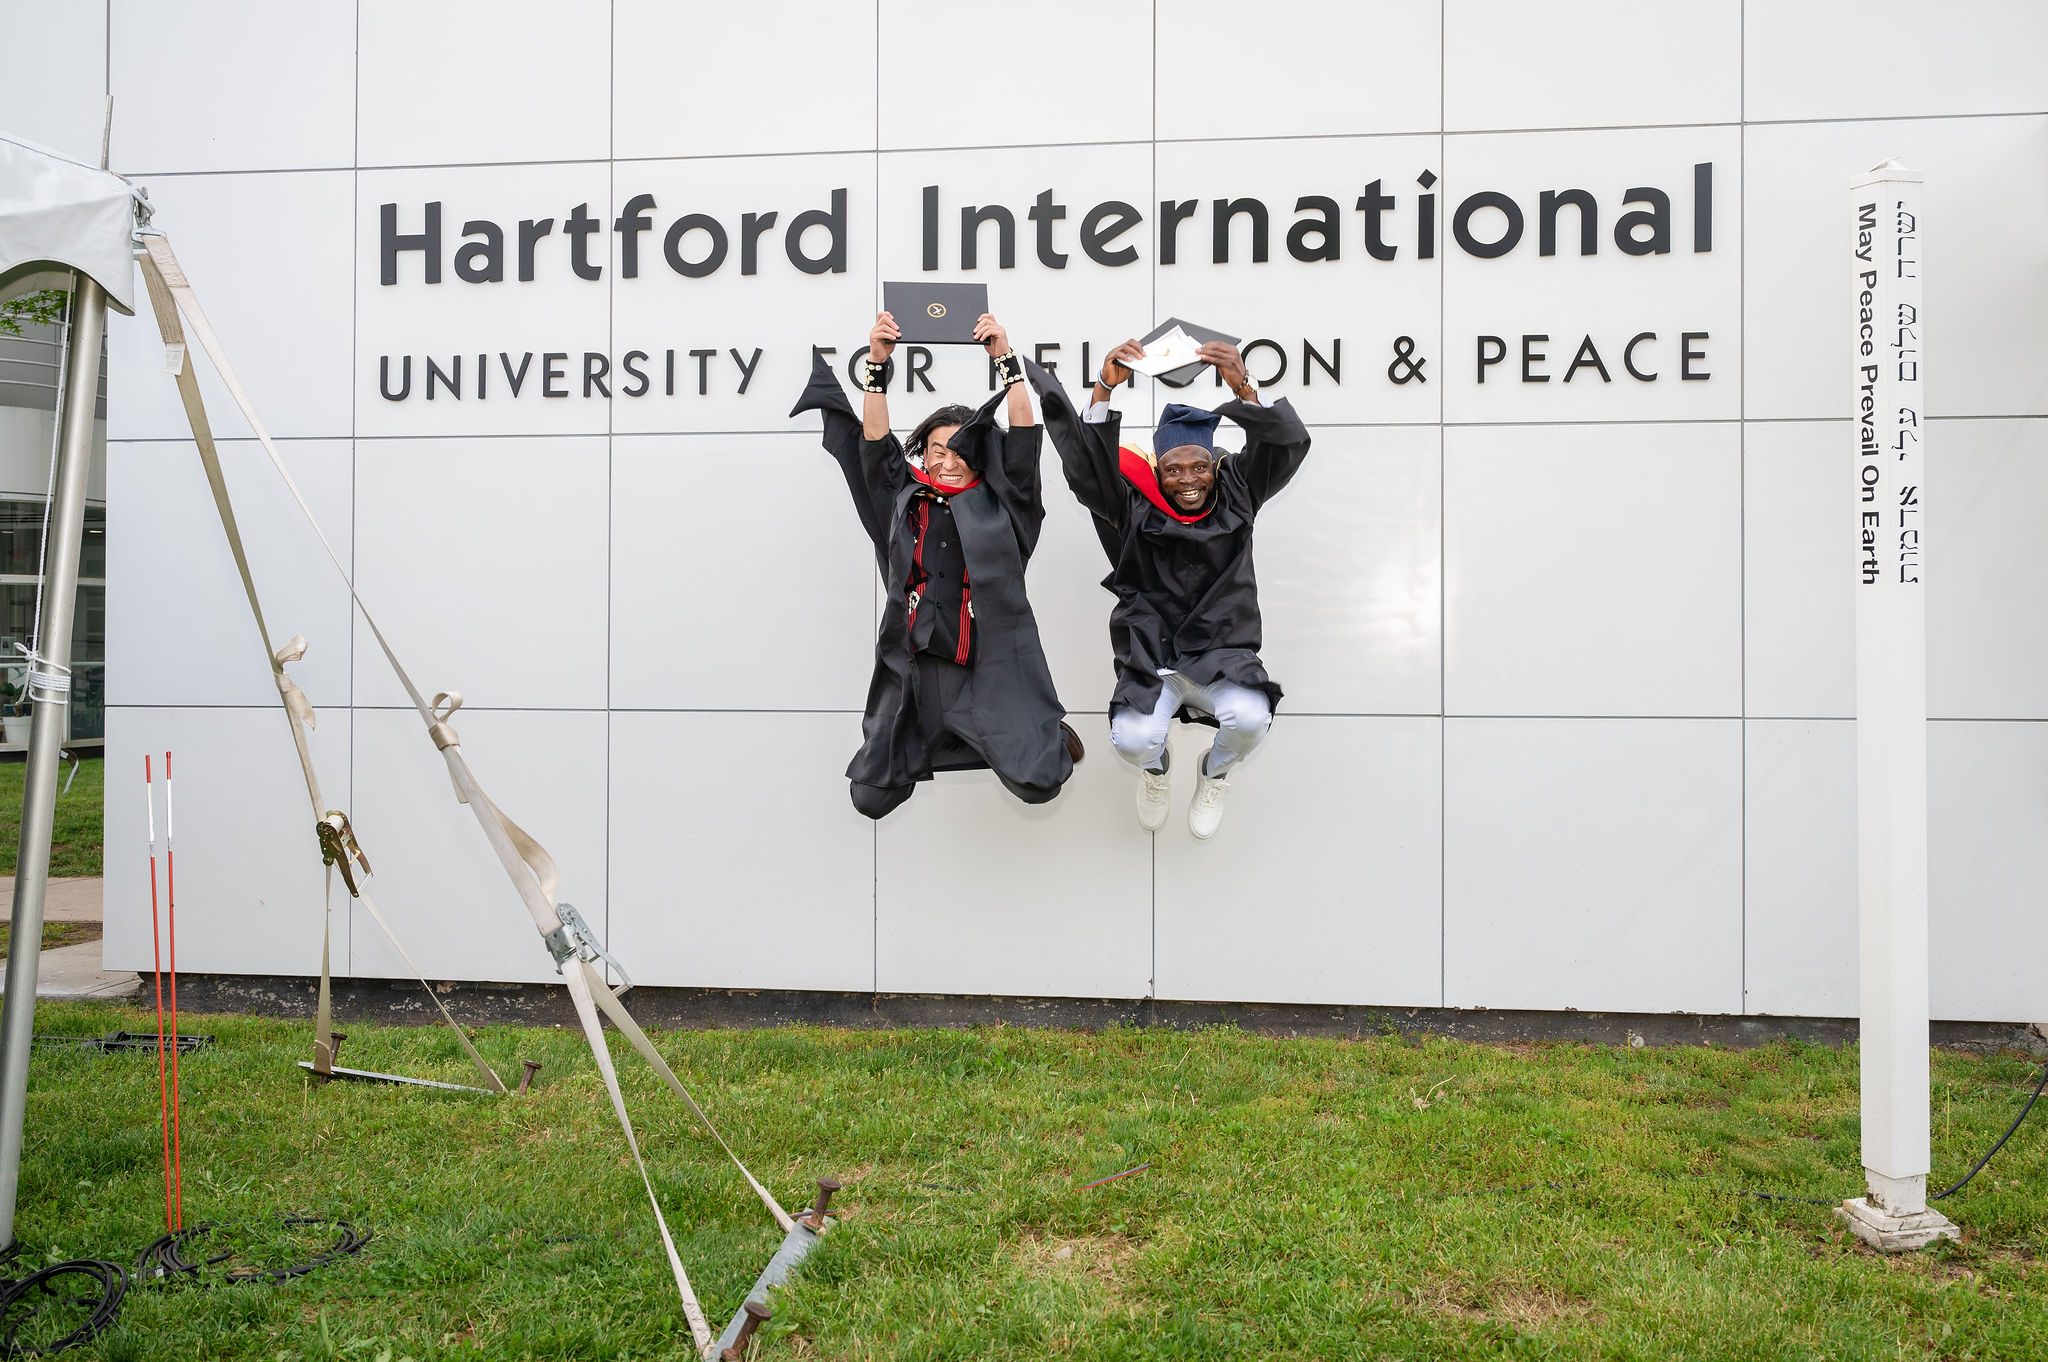 Two people in graduation robes jumping